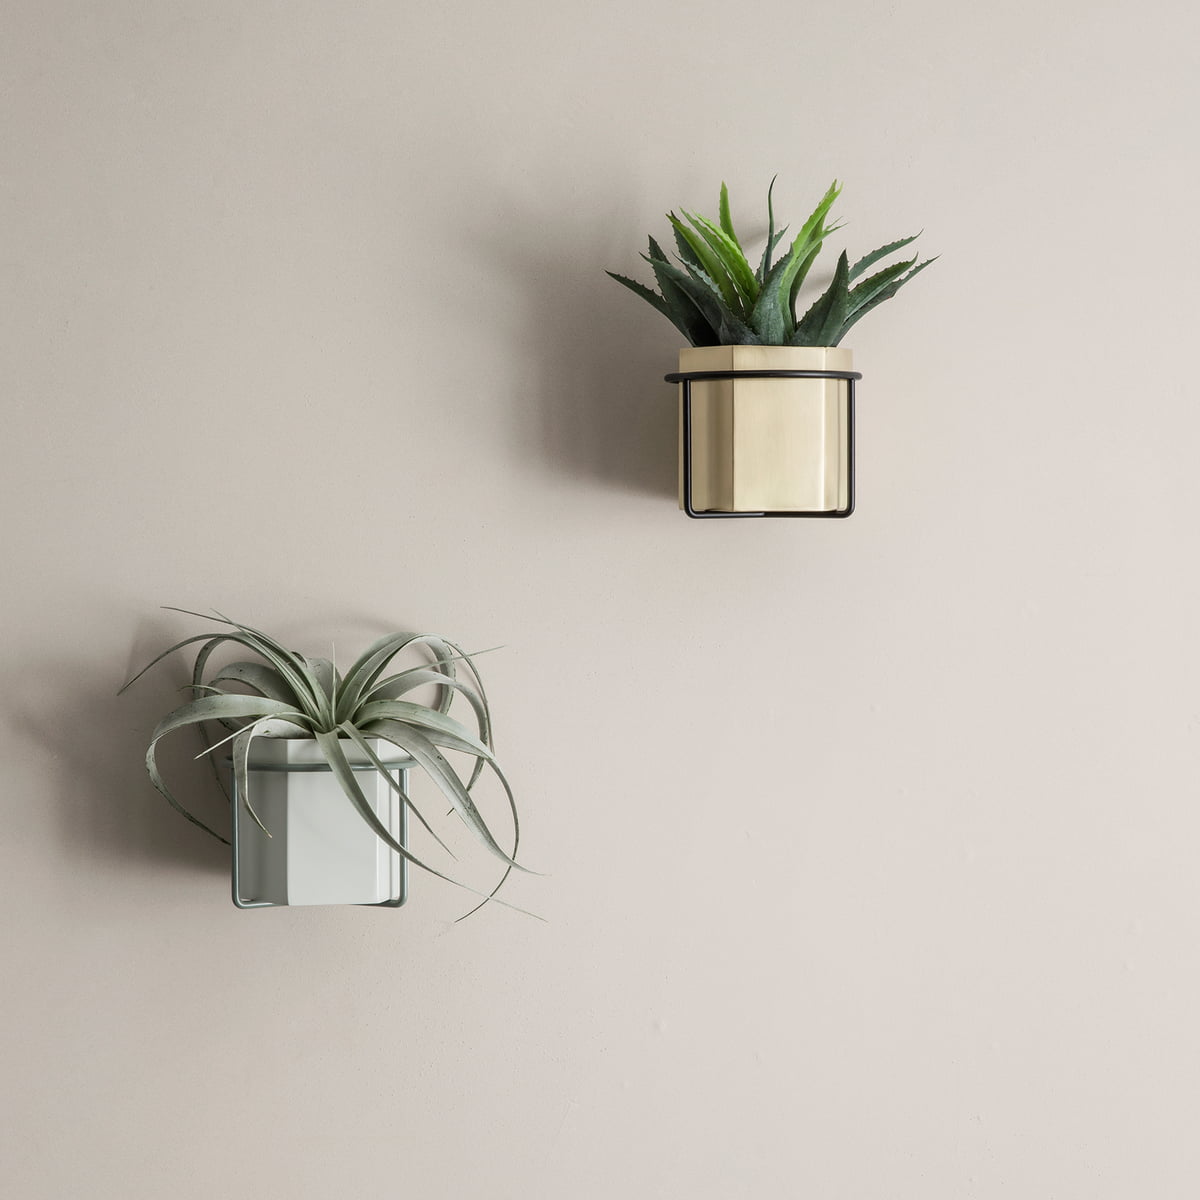 uitslag neef Ver weg Wall plant holder by ferm Living in our shop